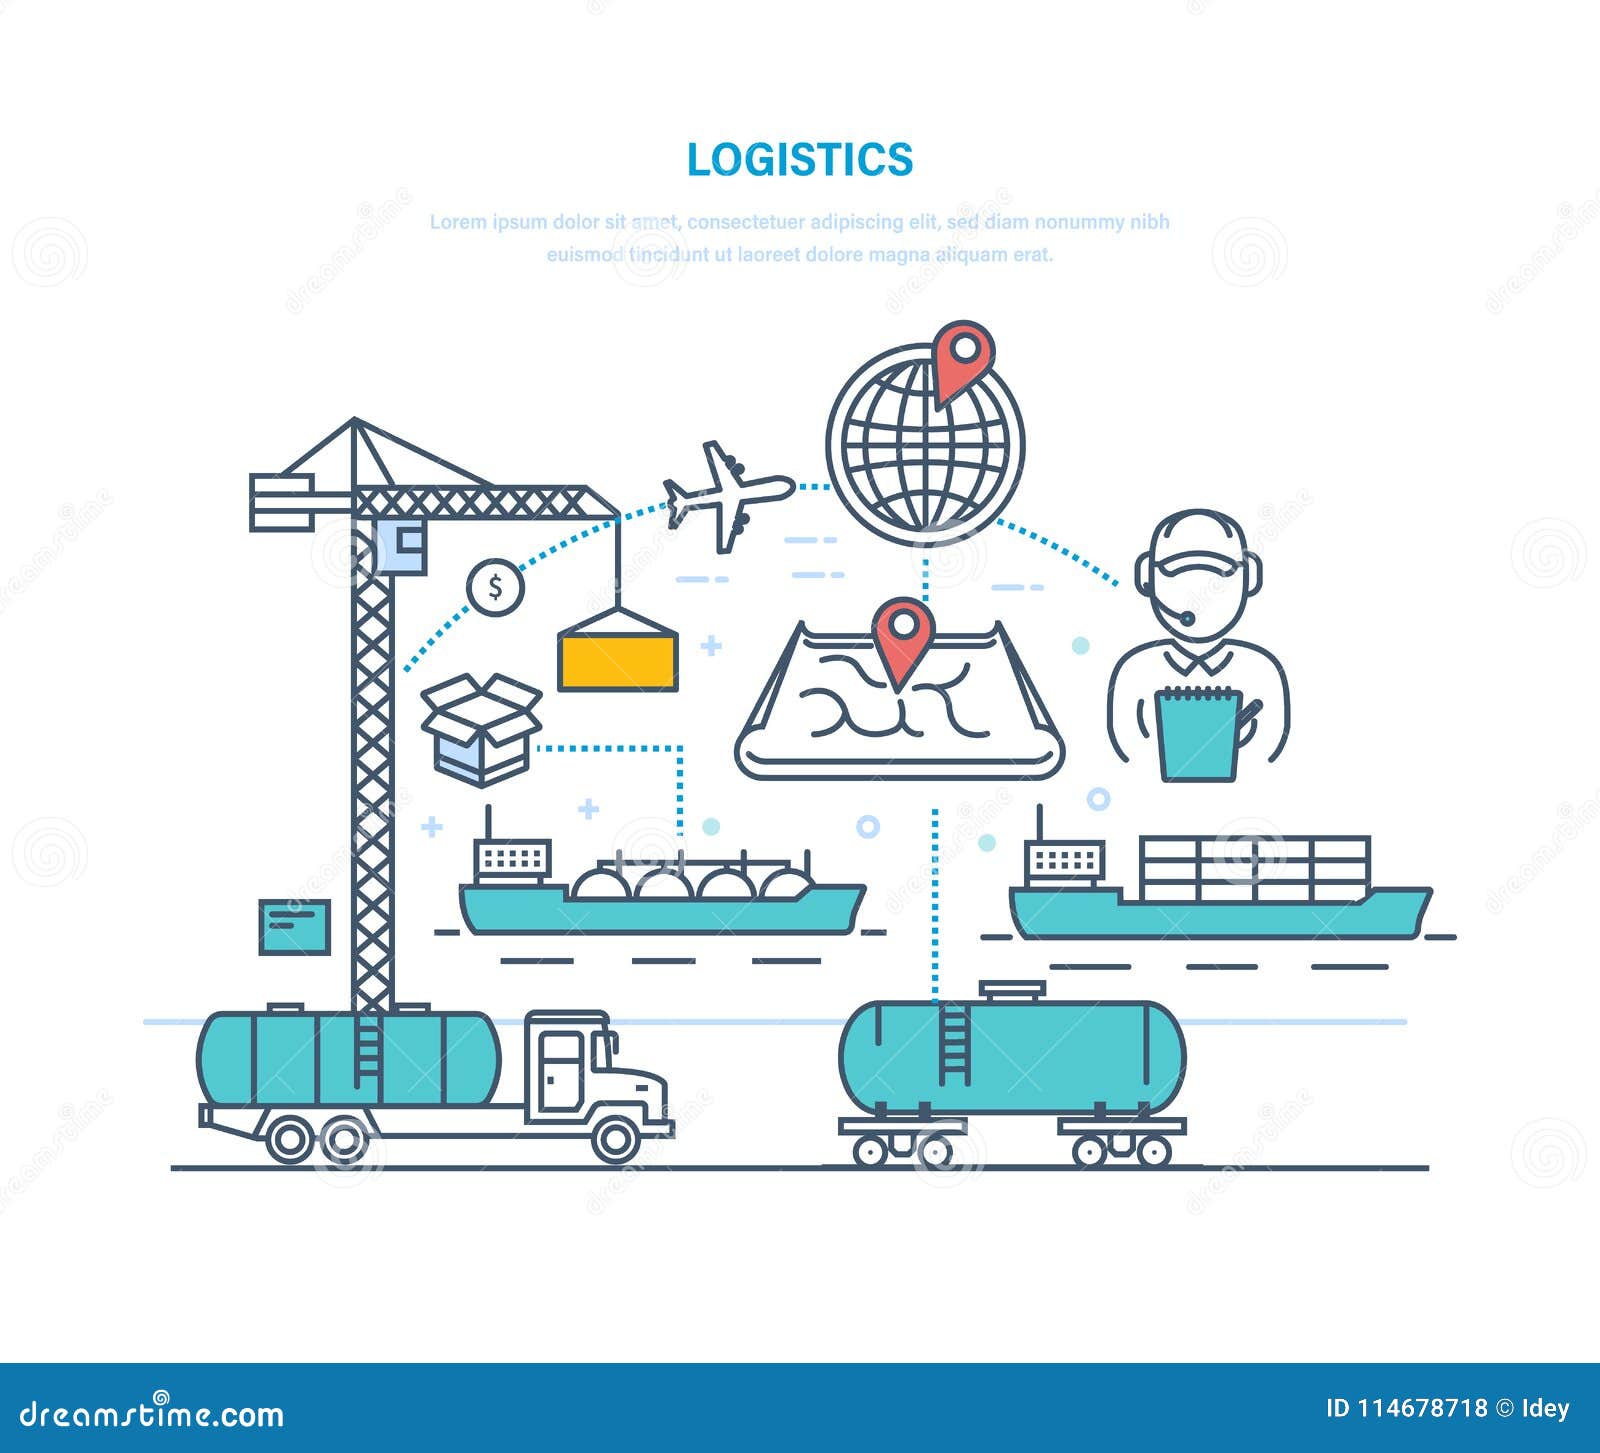 logistics. organization delivery, transporting cargo, selecting transport, optimizing route.